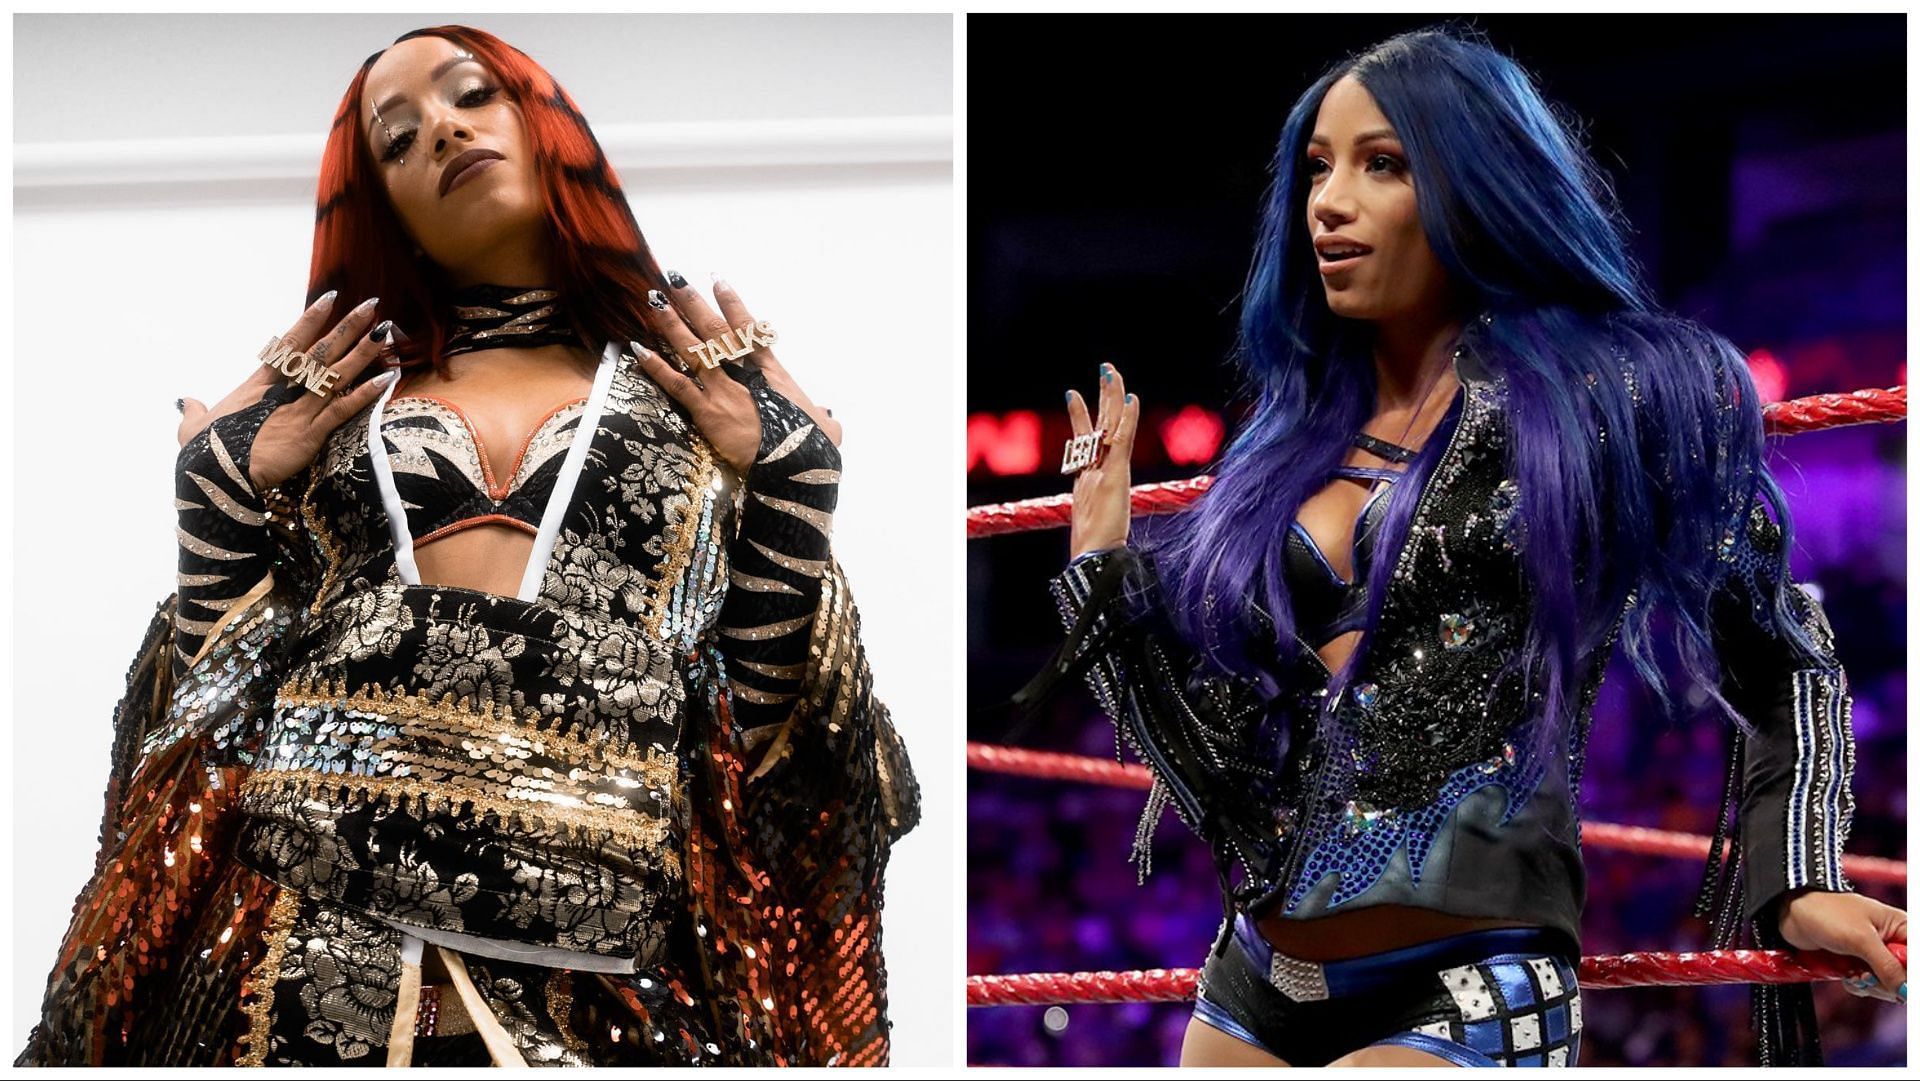 Mercedes Varnado poses backstage at NJPW as Mercedes Mon&eacute; and in the ring on WWE RAW as Sasha Banks